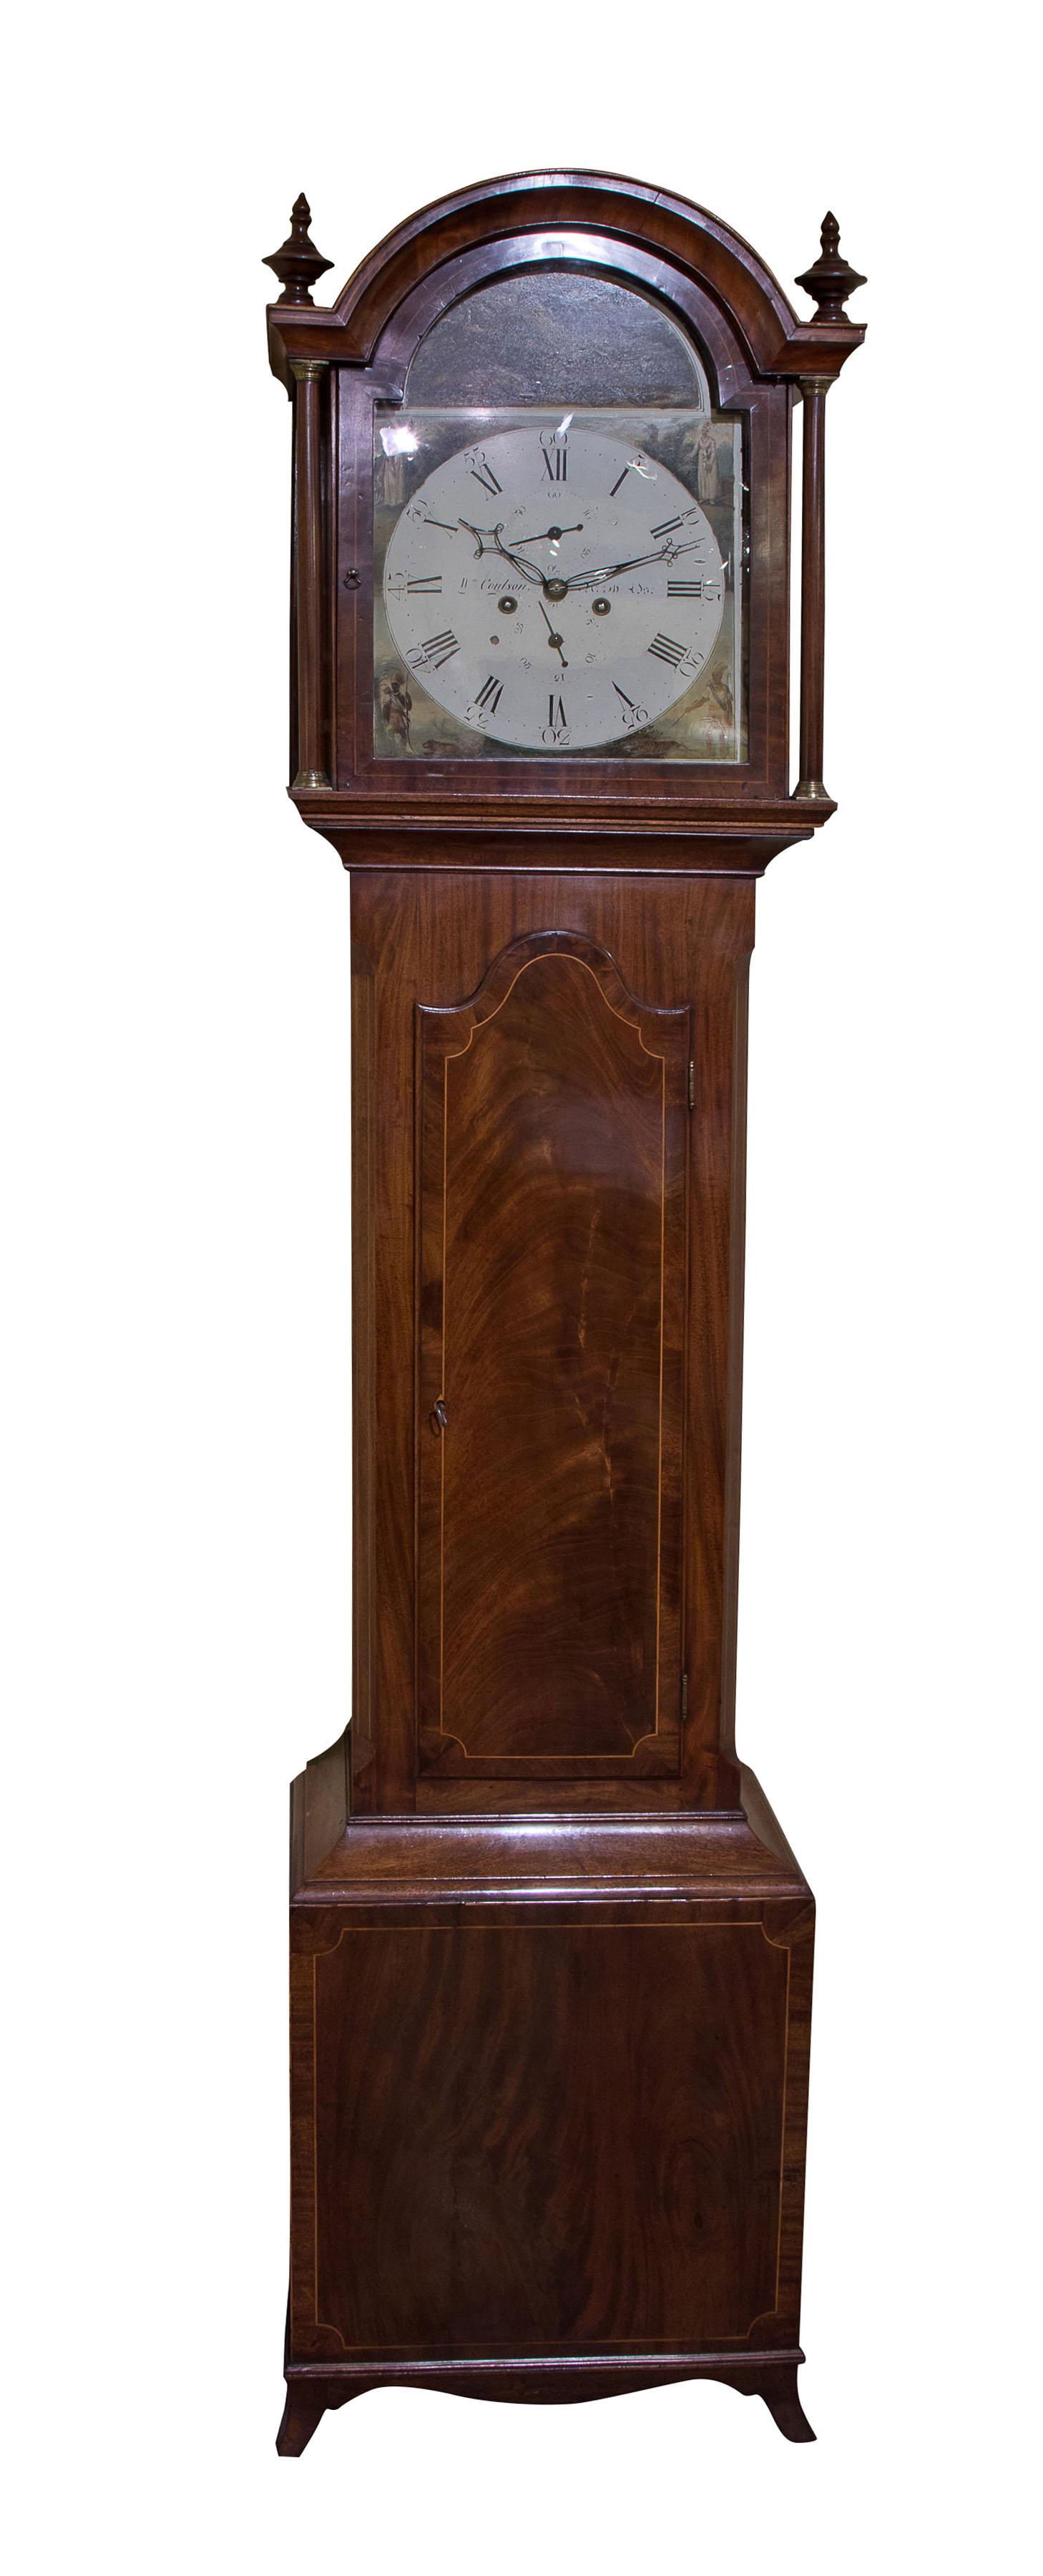 Late Georgian mahogany longcase clock, the painted dial signed WM Coulson of North Shields, with spandrels emblematic of the four continents below an arch painted with wild boar. A finely figured case, crossbanded and string inlay with 8 day